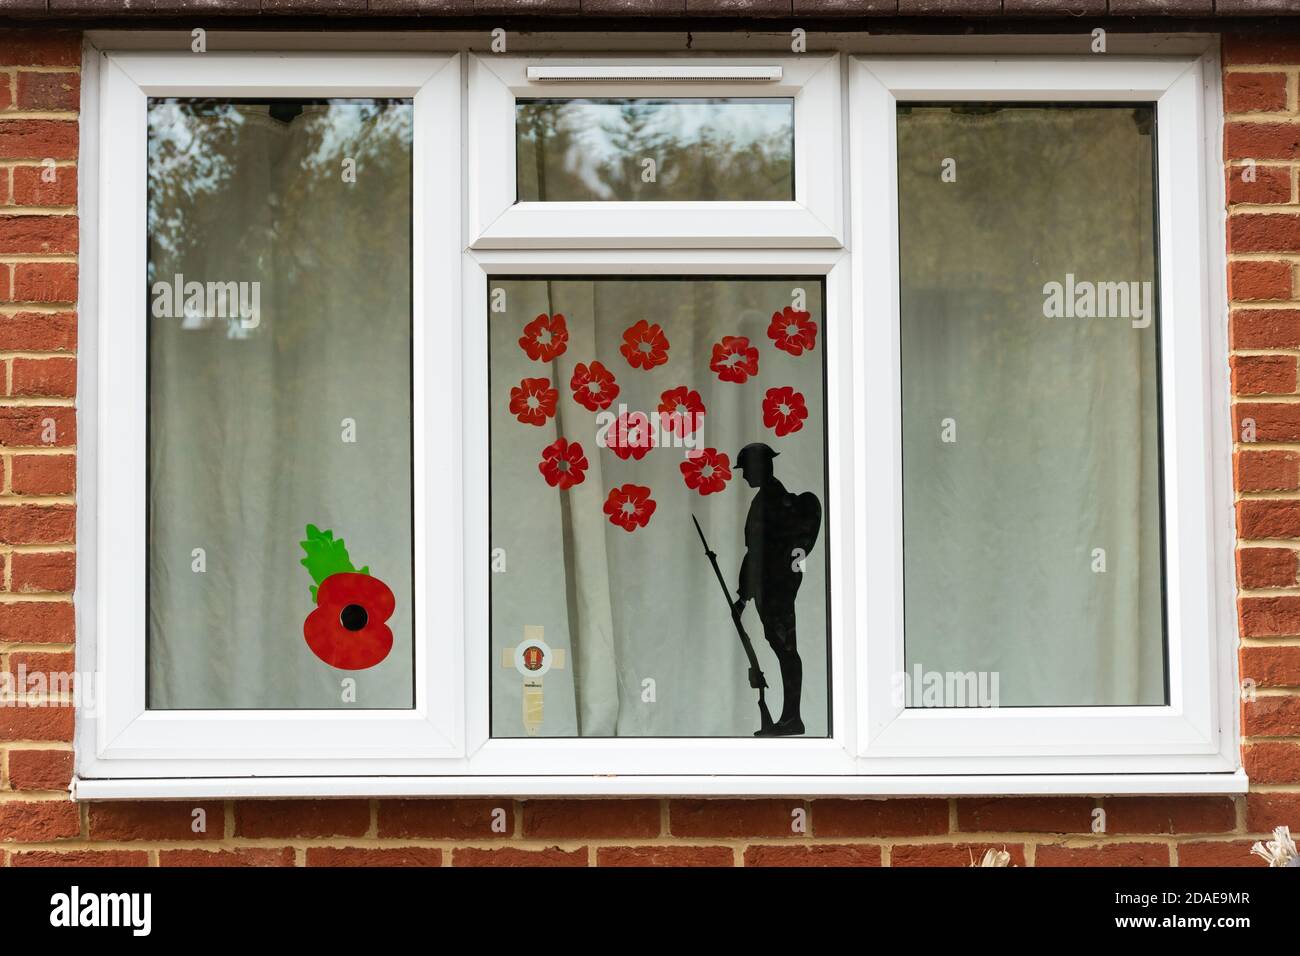 Window decorated for remembrance day with poppies and a soldier silhouette, commemorating armistice during the 2020 coronavirus covid-19 pandemic, UK Stock Photo